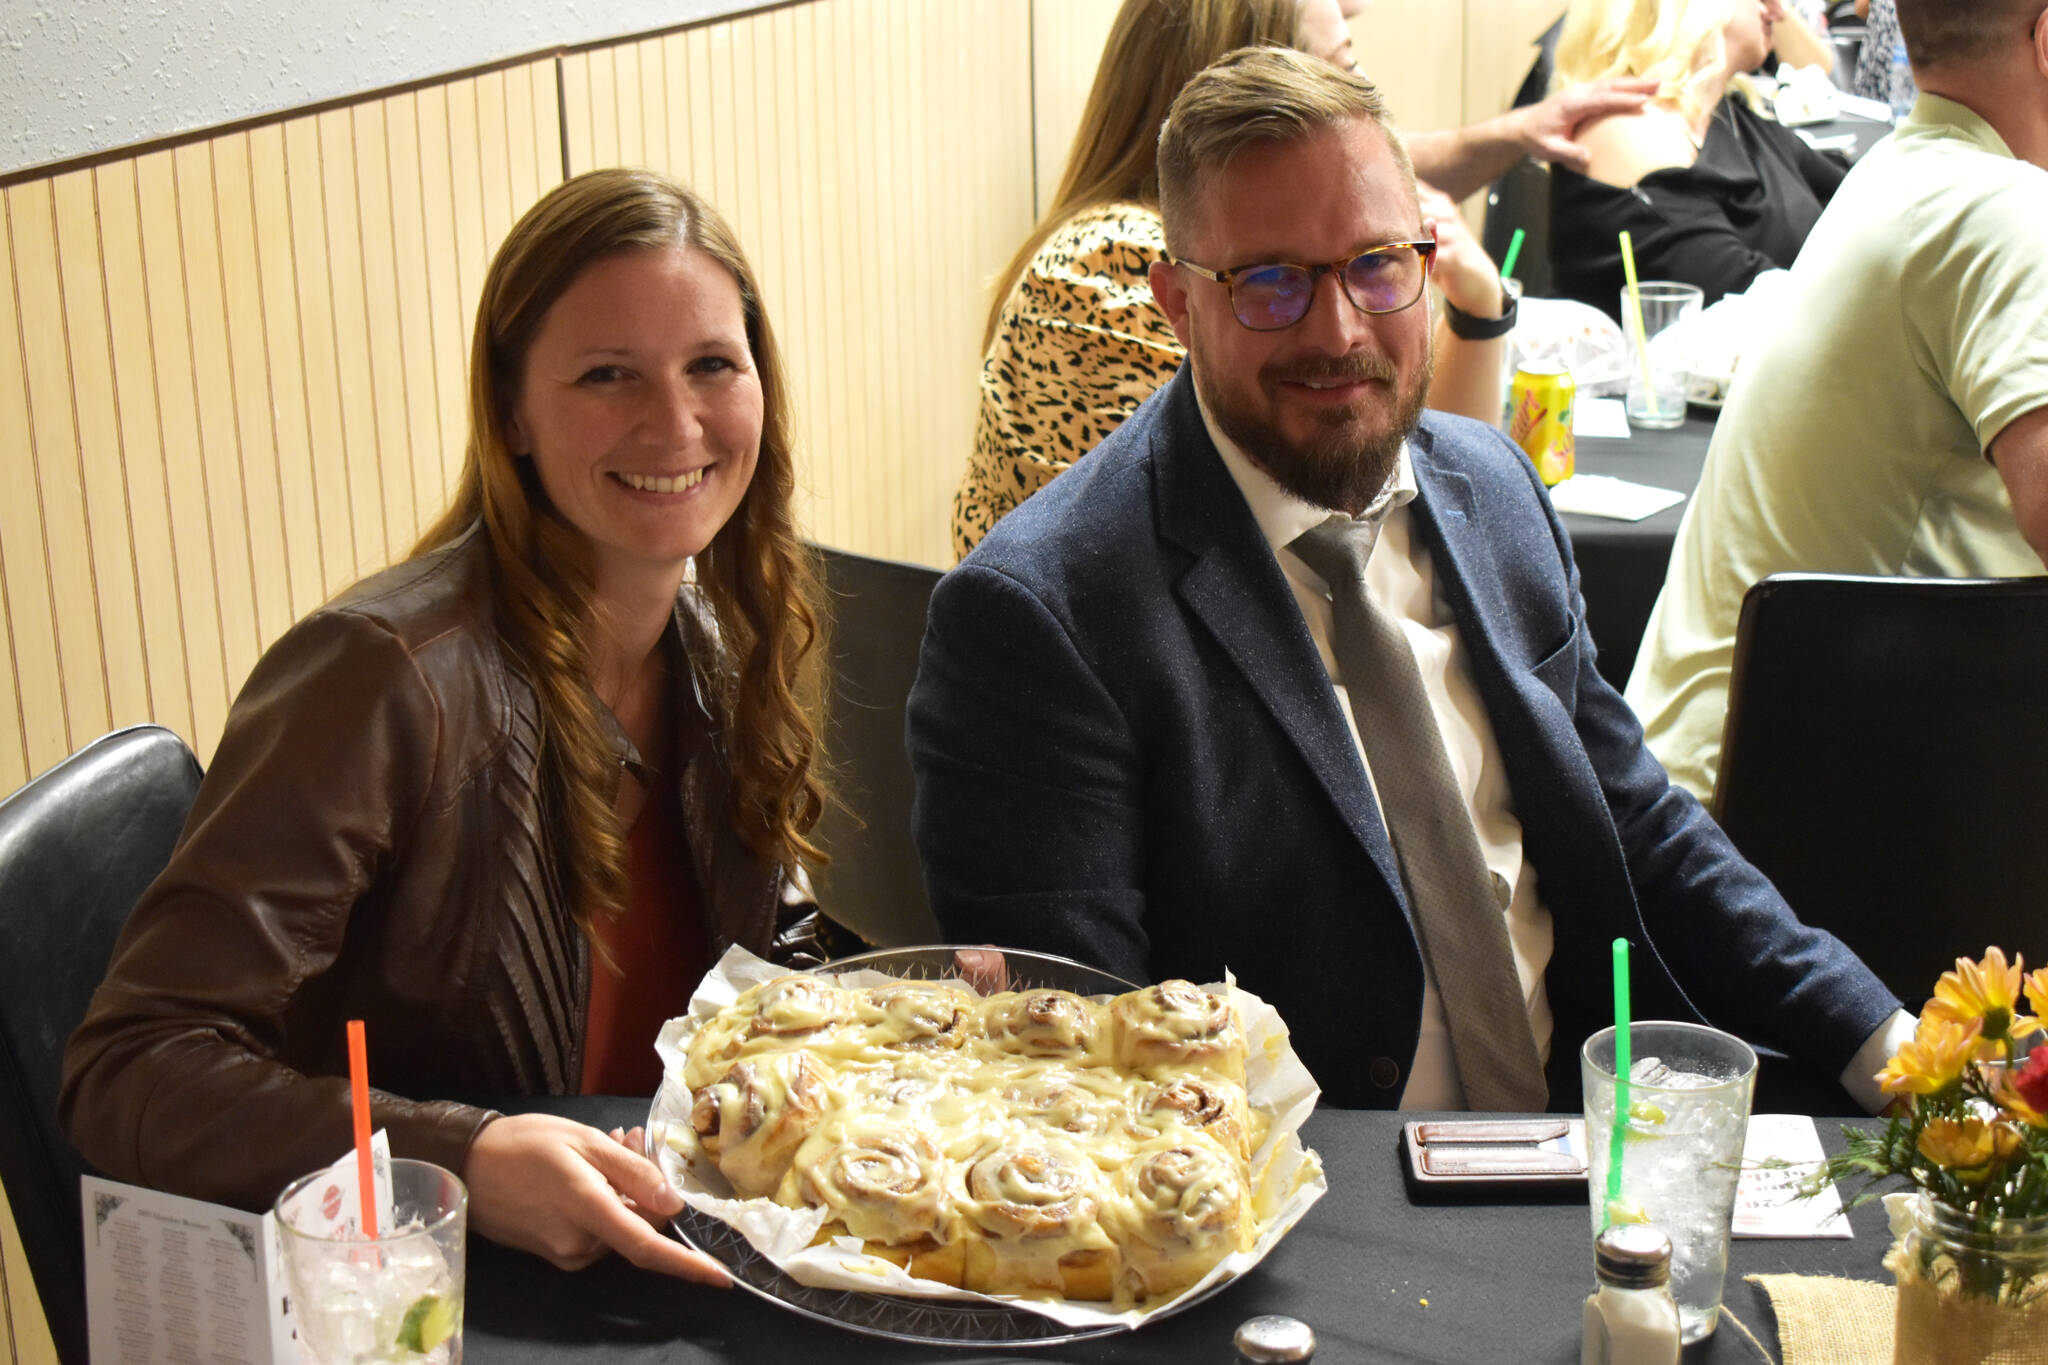 Kassey Robbins (left) holds a plate of cinnamon rolls she won for $200 in a dessert auction for the 2022 Elma Citizen of the Year event at the Elma Eagles Banquet Hall on April 29, 2022.